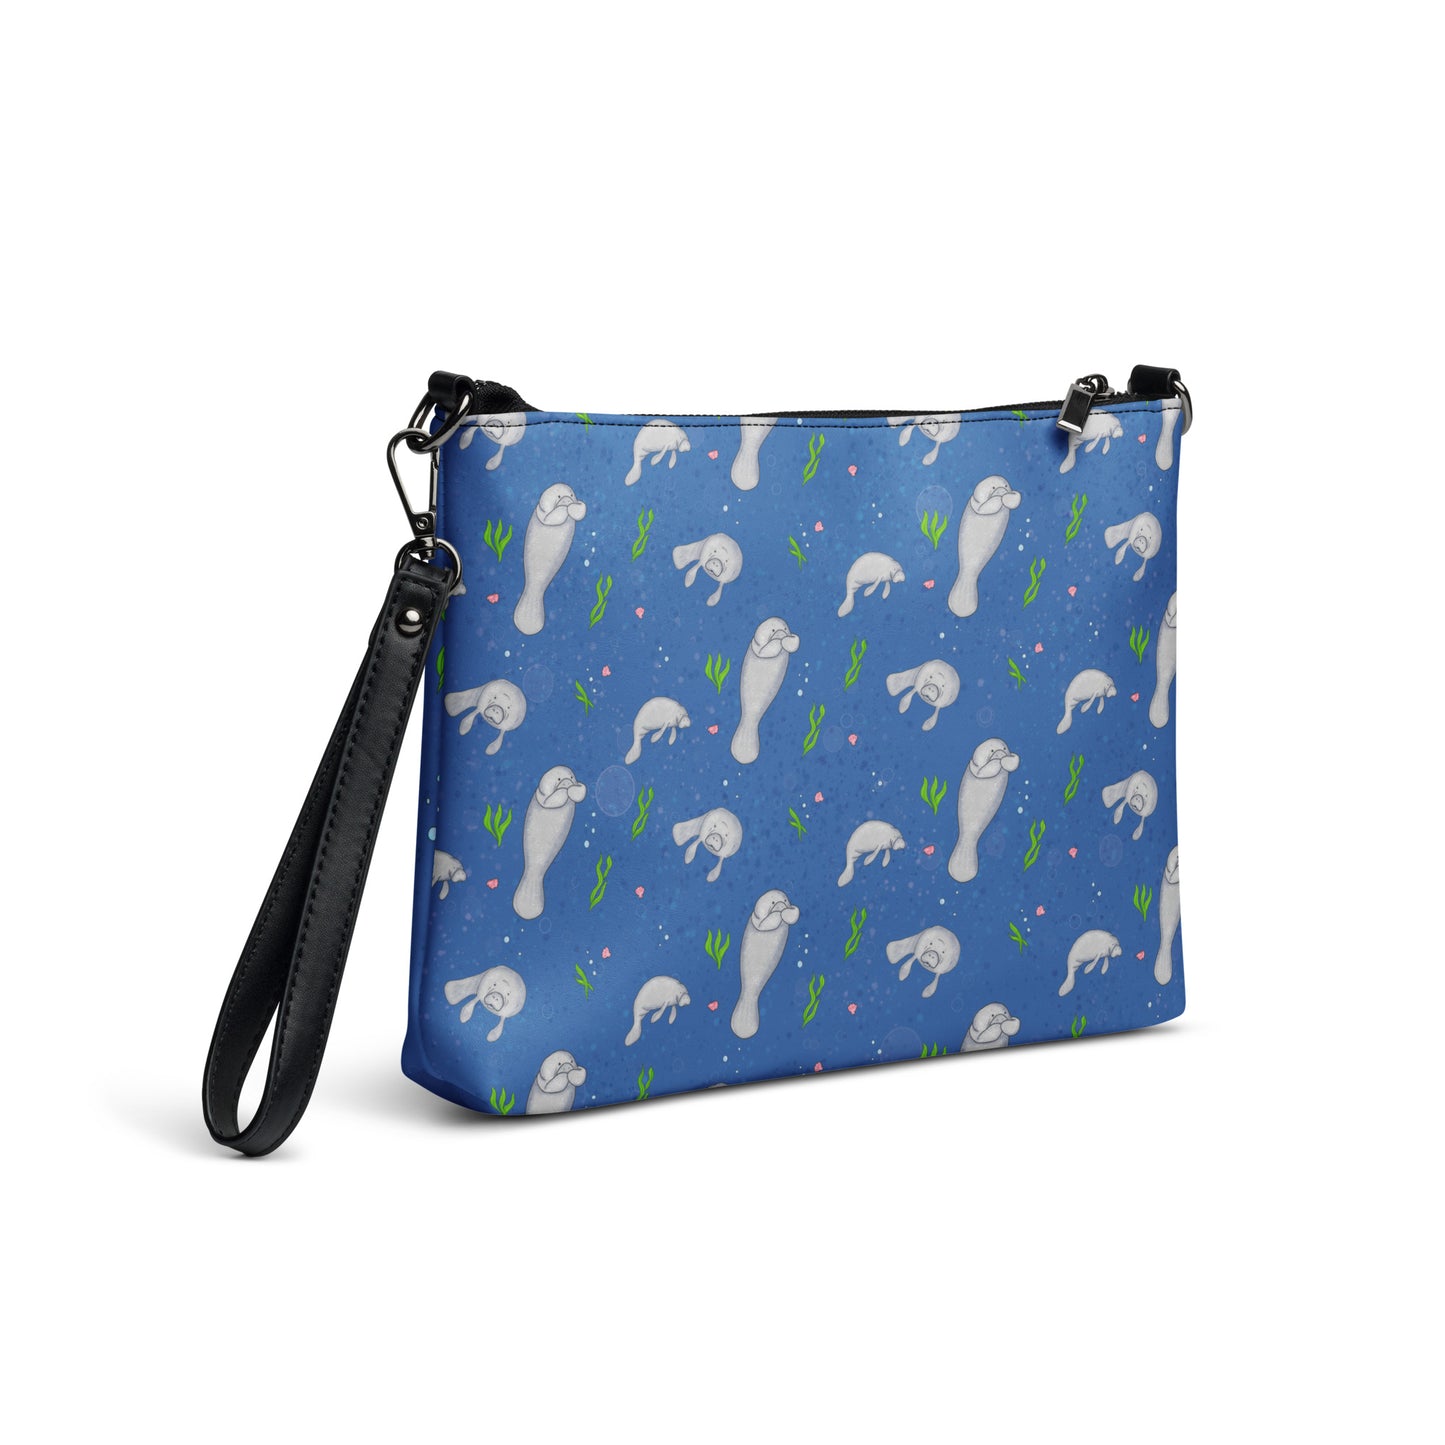 Manatee crossbody bag. Faux leather with polyester lining and dark grey hardware. Comes with adjustable removable wrist and shoulder straps. Back view of bag with manatees patterned on a dark blue background.